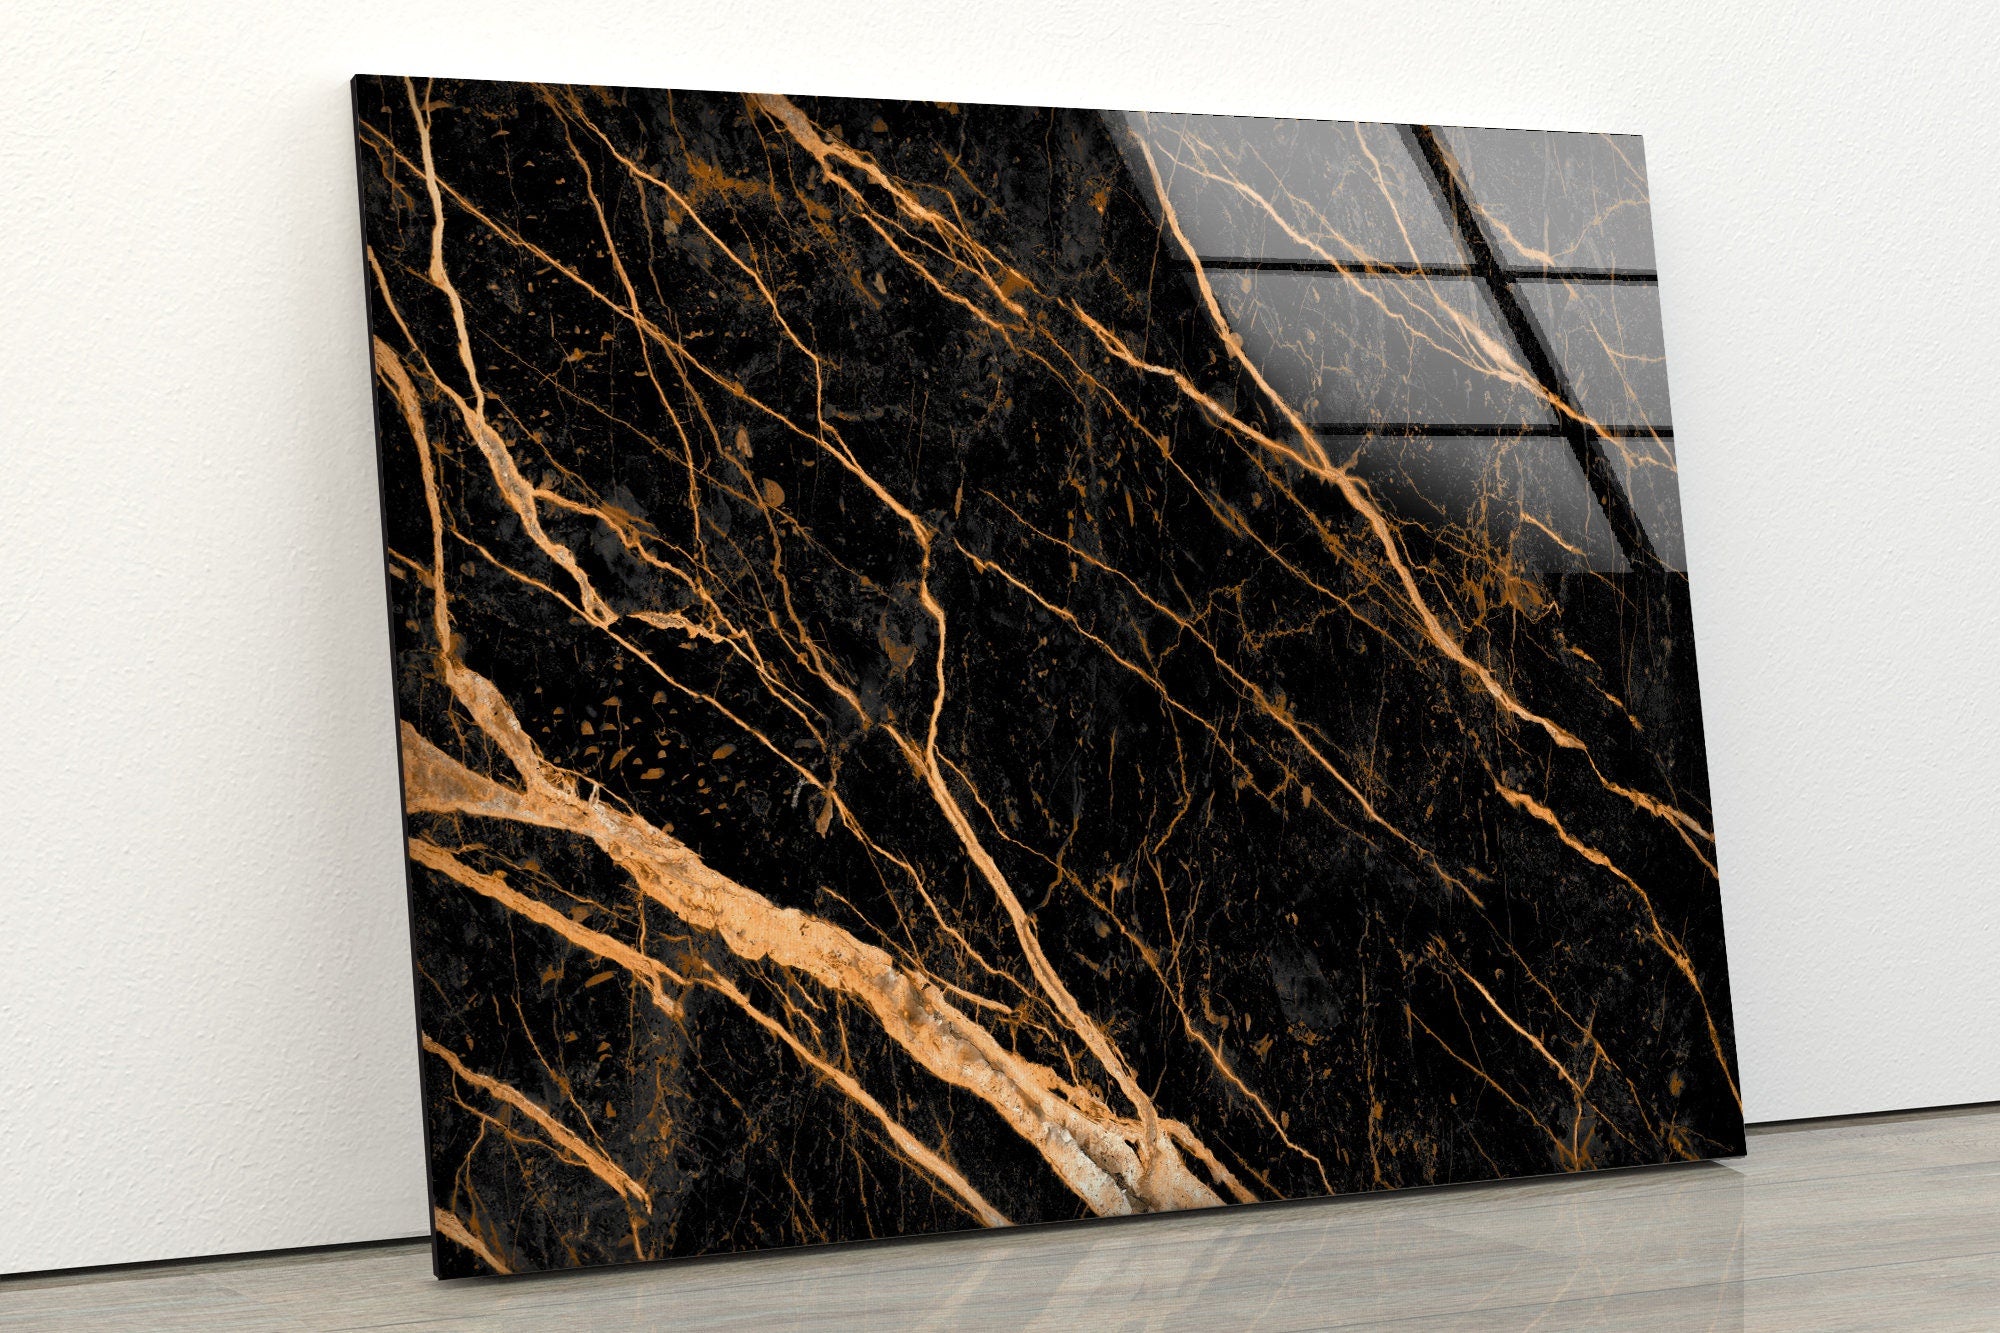 Gold Black Abstract Tempered Glass Wall Art